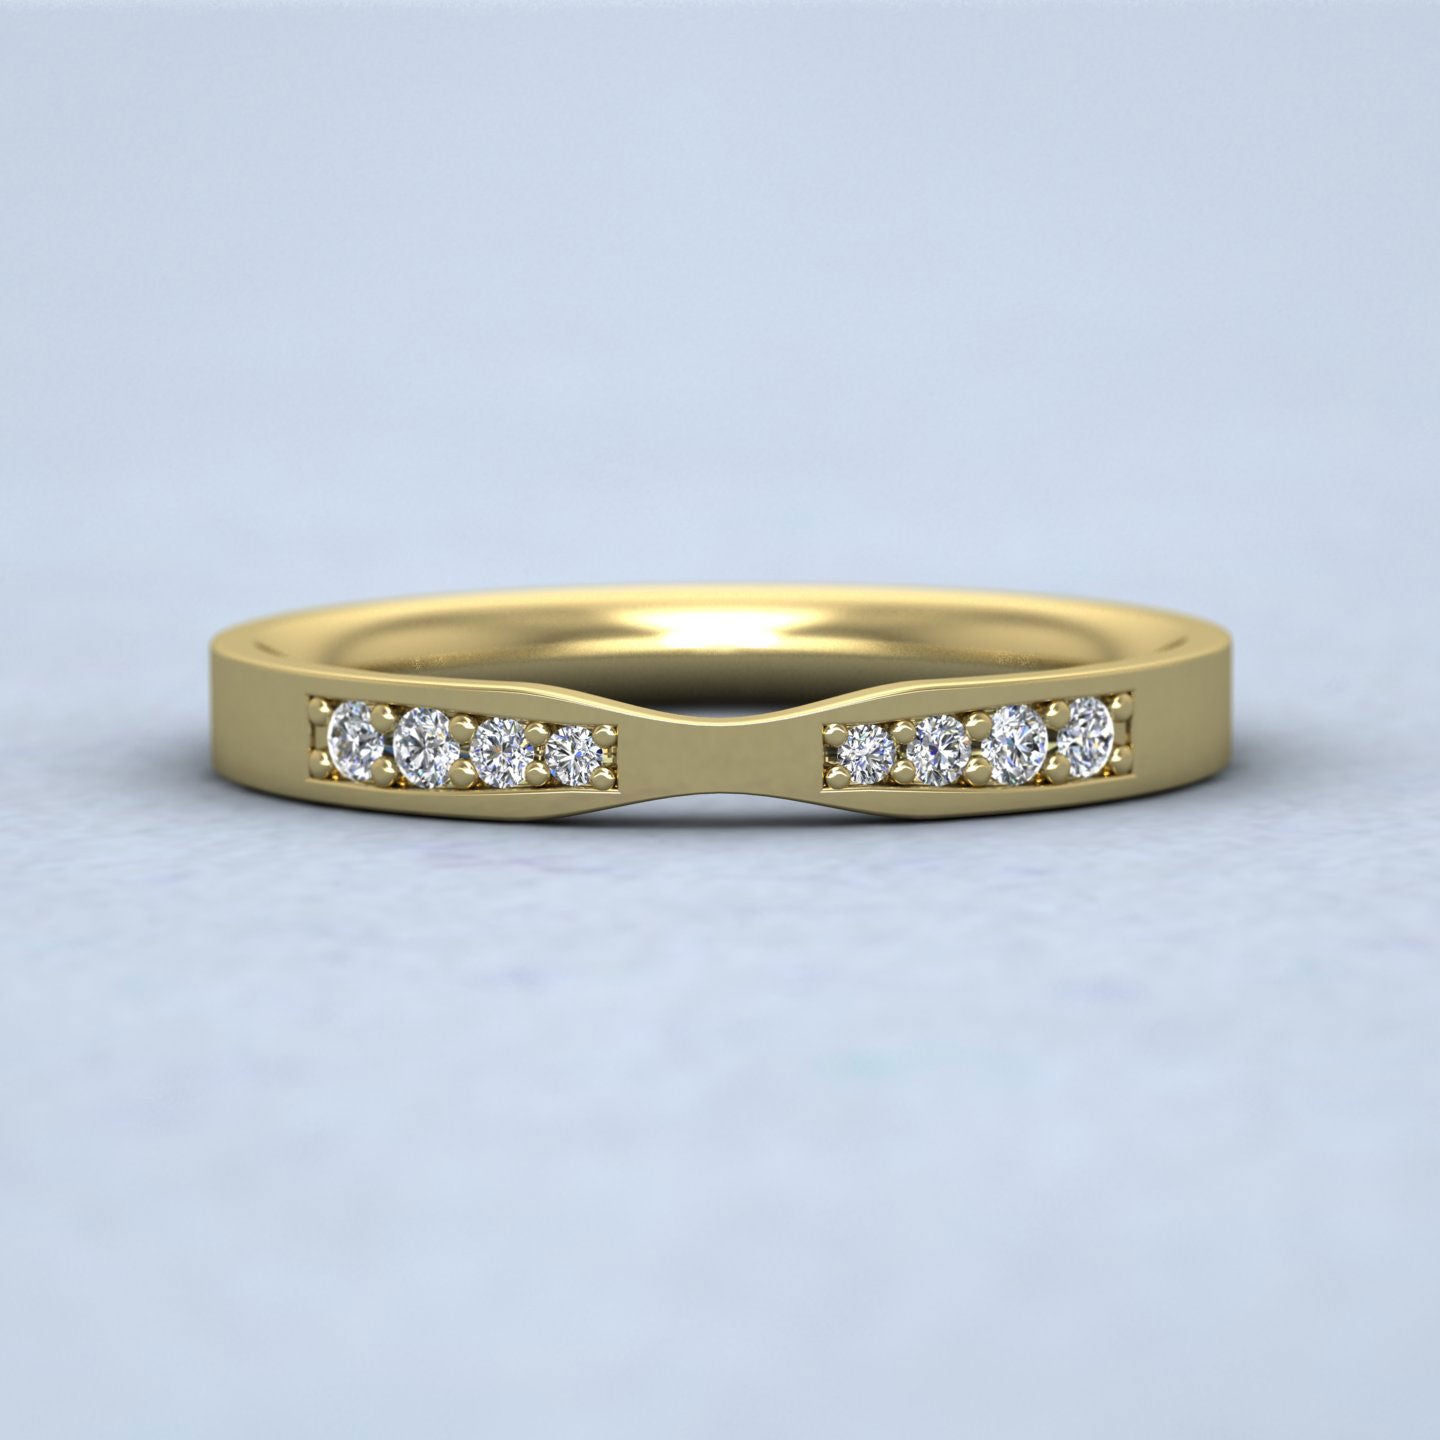 Pinch Shaped Wedding Ring In 9ct Yellow Gold 2.5mm Wide